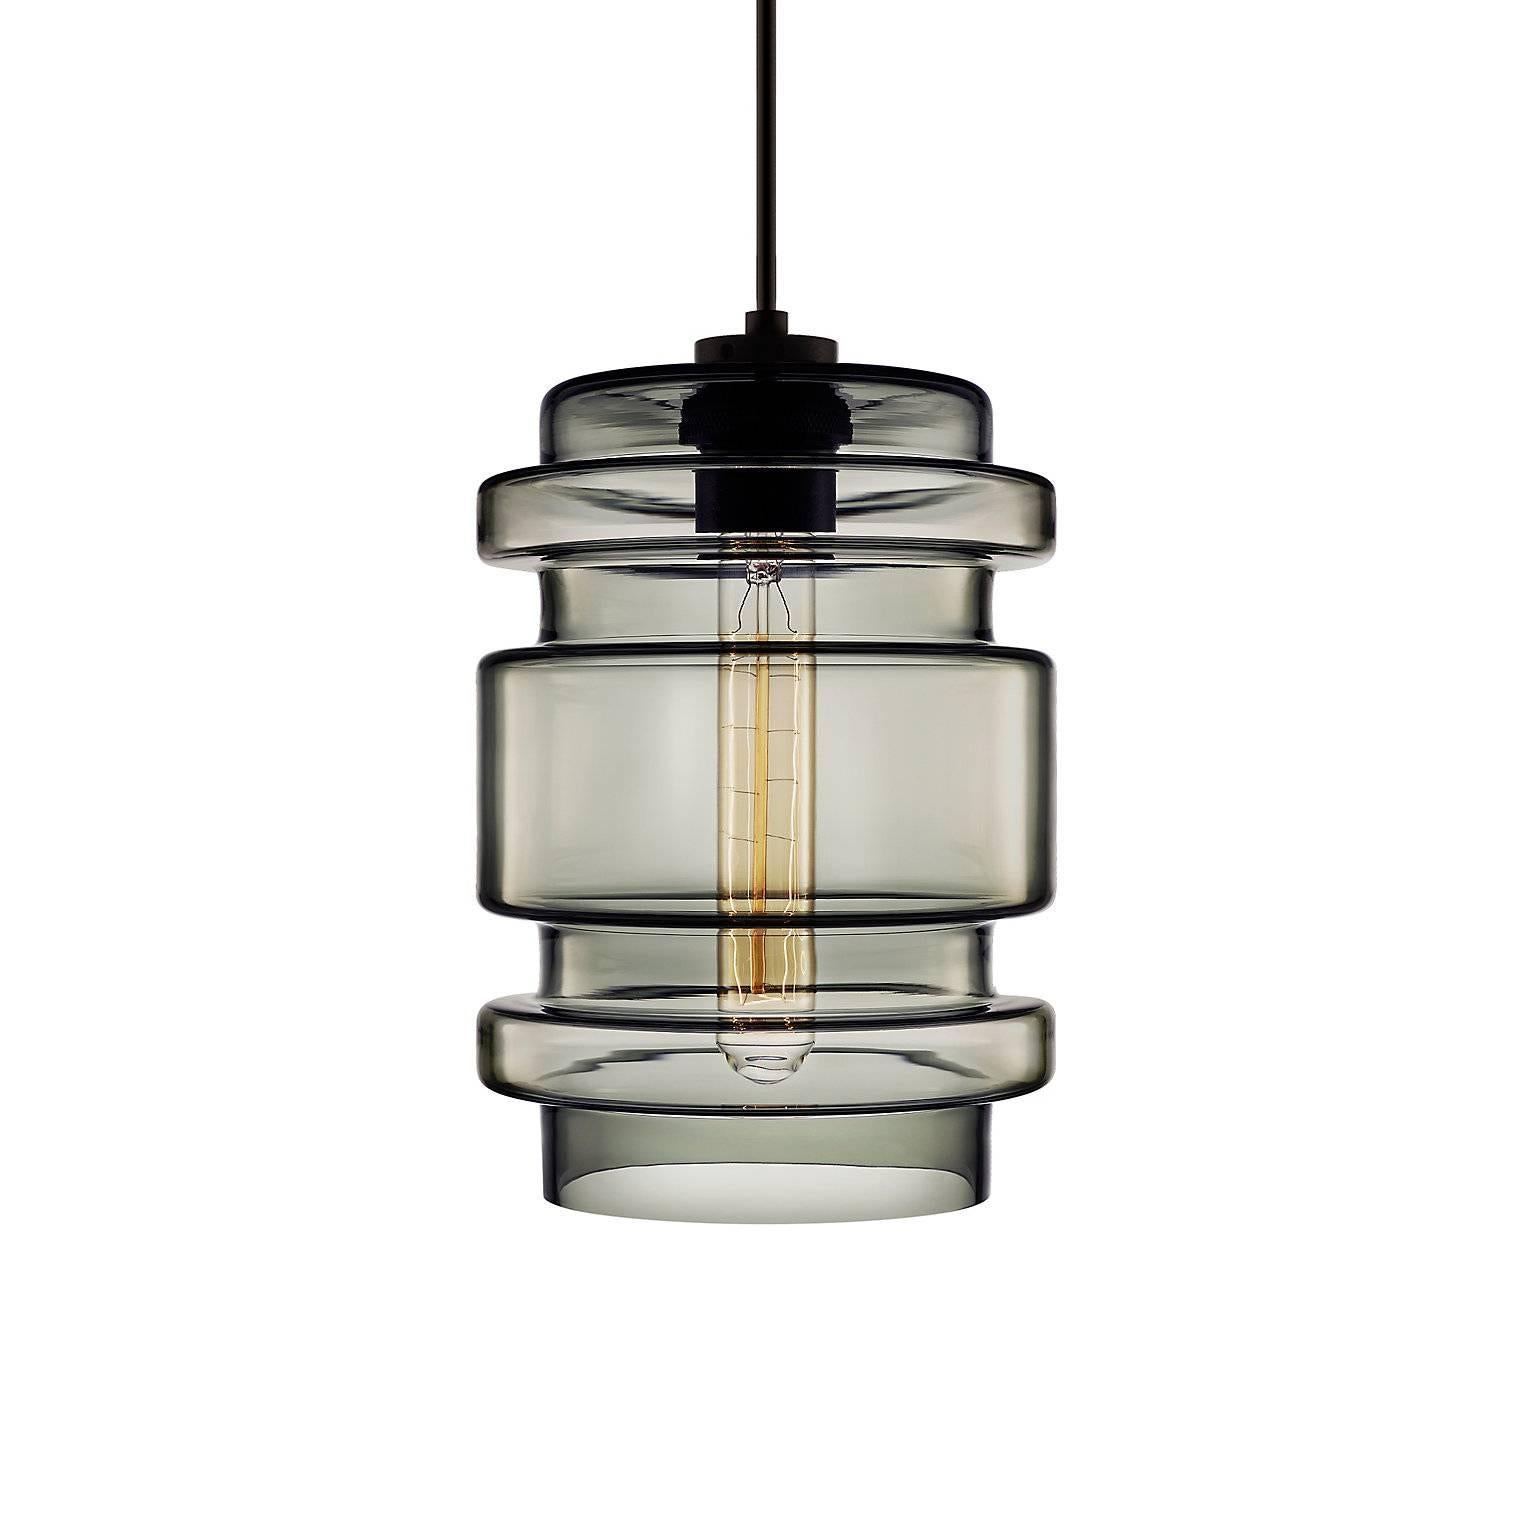 Unique to the Crystalline Series, the Delinea pendant light features a dynamic shape and vibrant colors. Pairs easily with the Trove, Axia, and Calla pendants that also comprise the Crystalline Series. Every single glass pendant light that comes